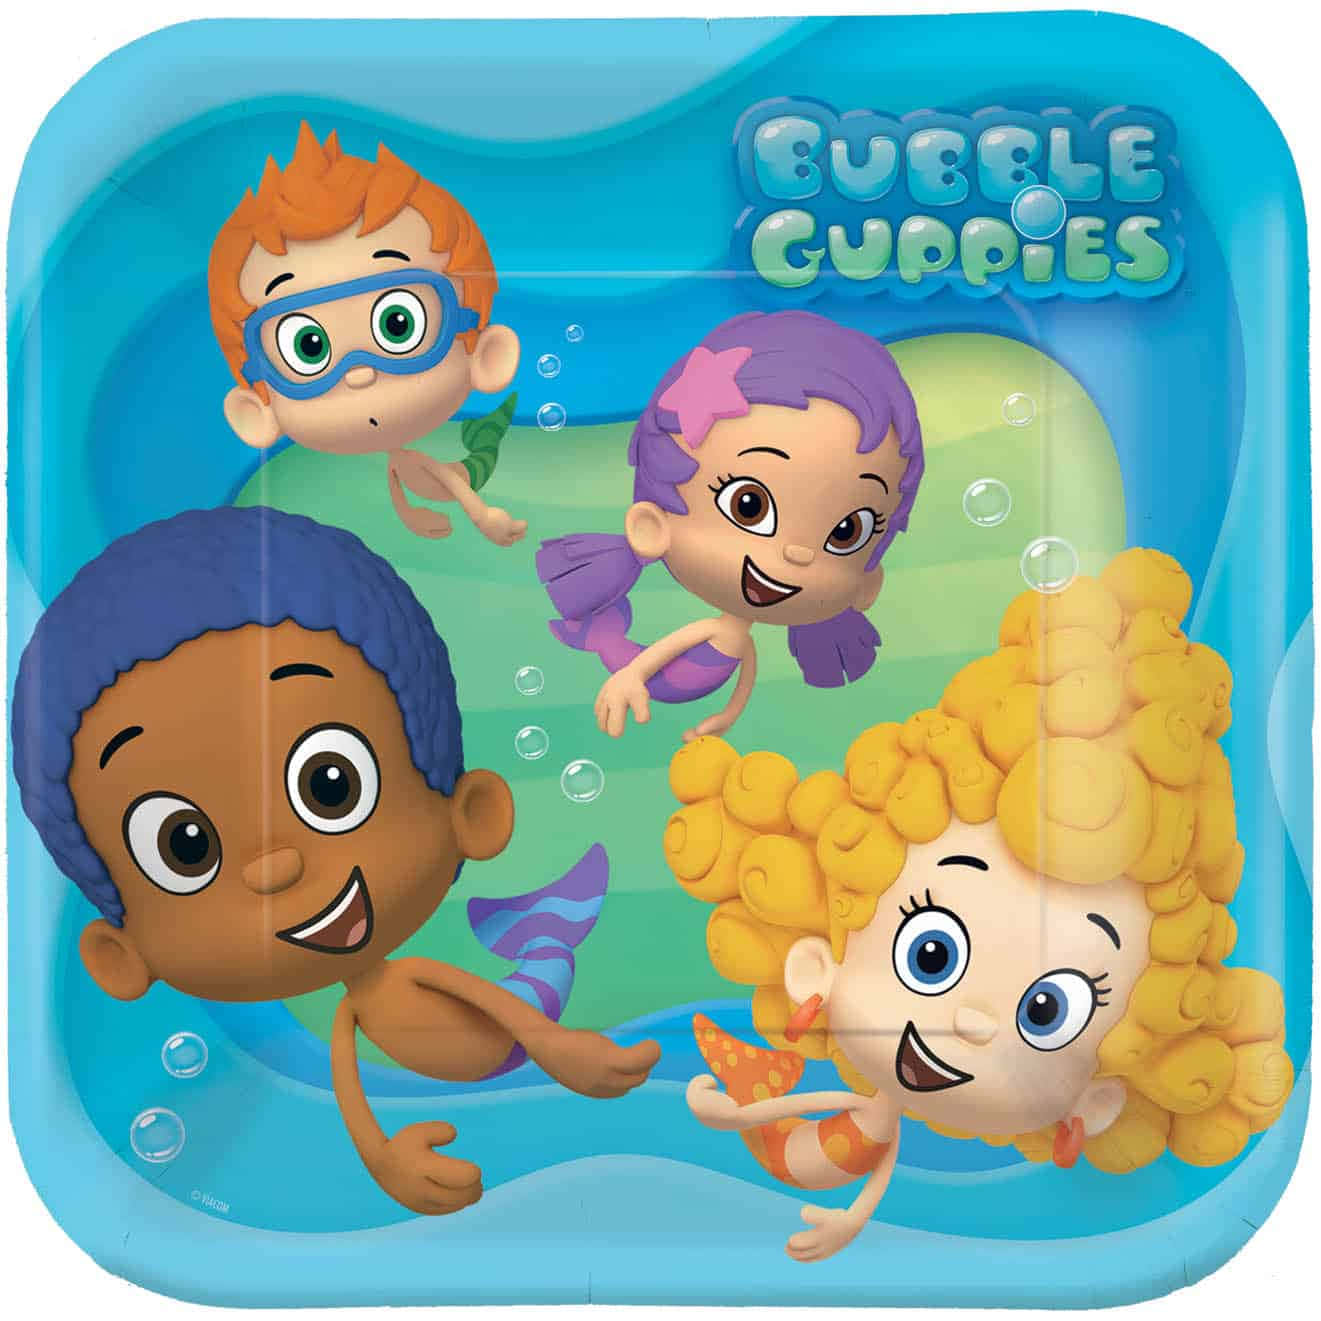 Join the Bubble Guppies on a Fantastical Underwater Adventure!